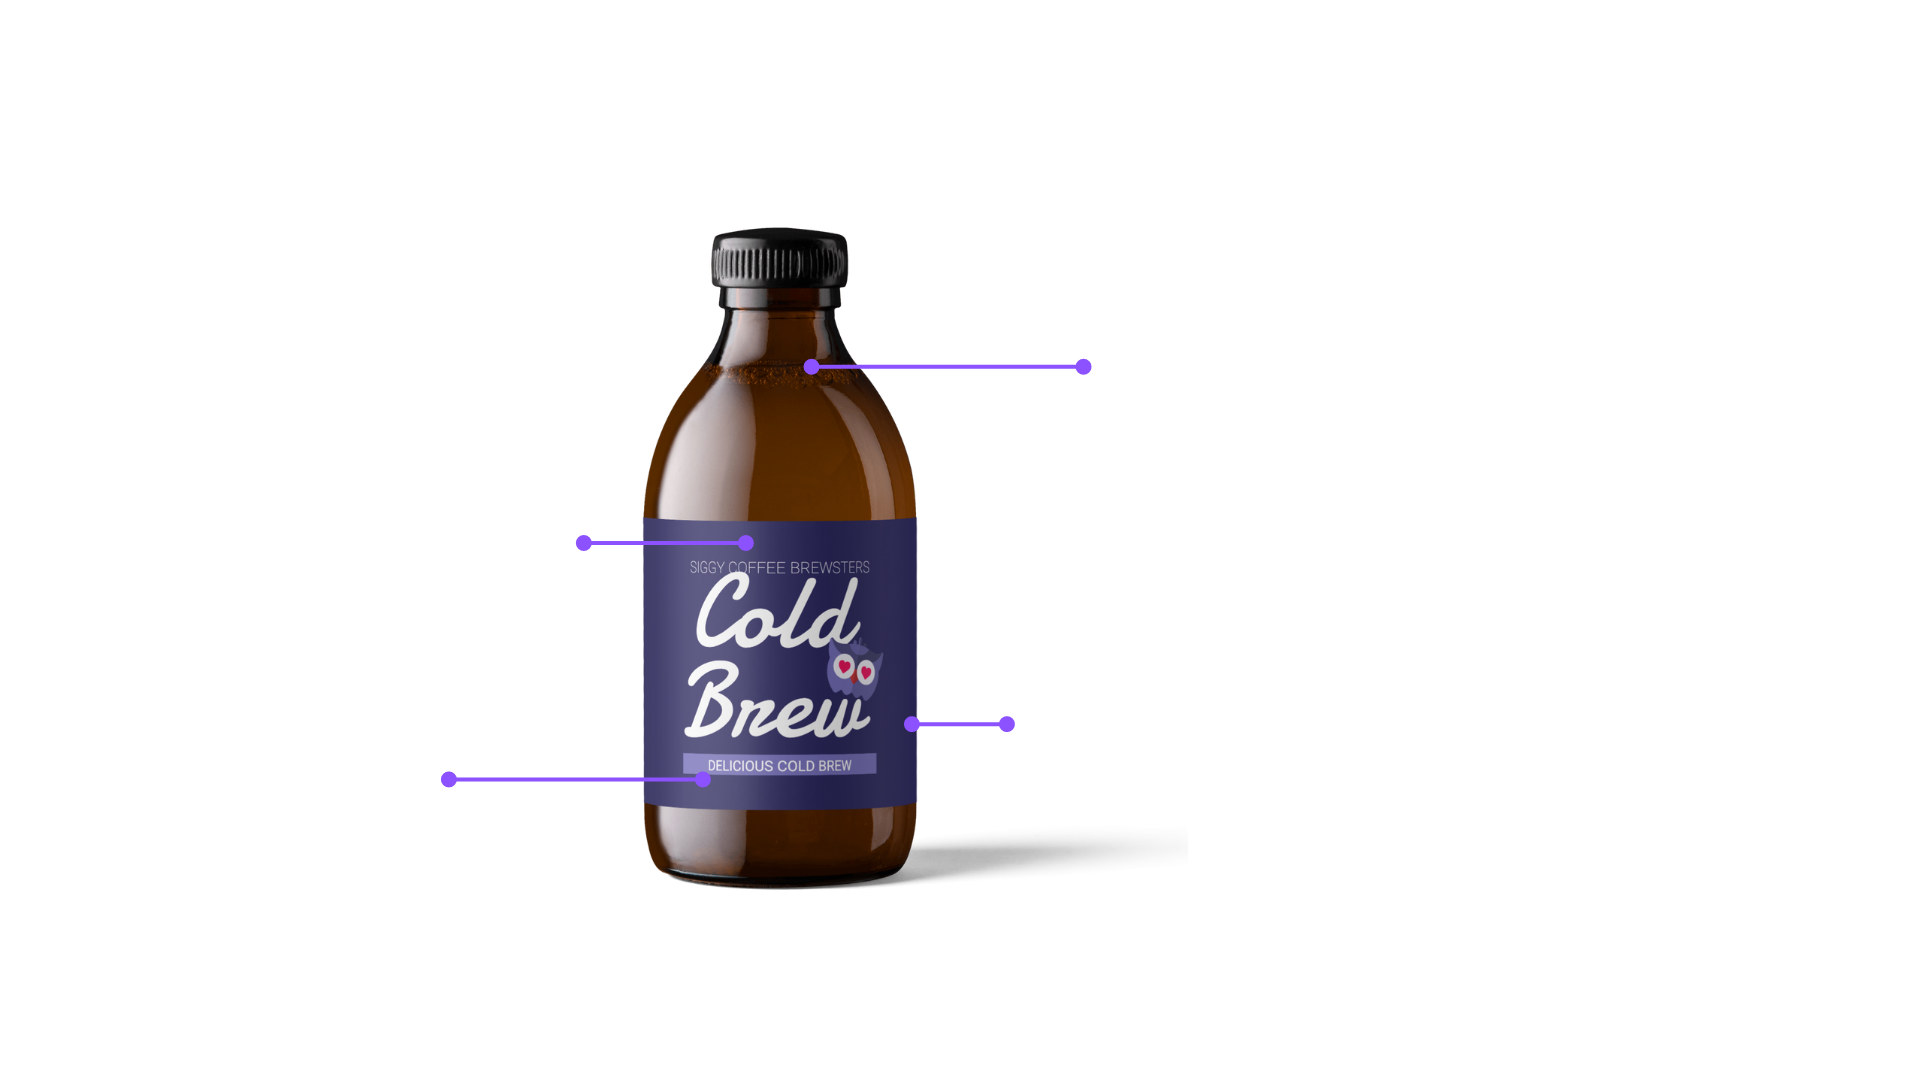 Picture of a cold brew bottle with callouts on its attributes, which are the aspects that will be evaluated in a maxdiff or conjoint analysis